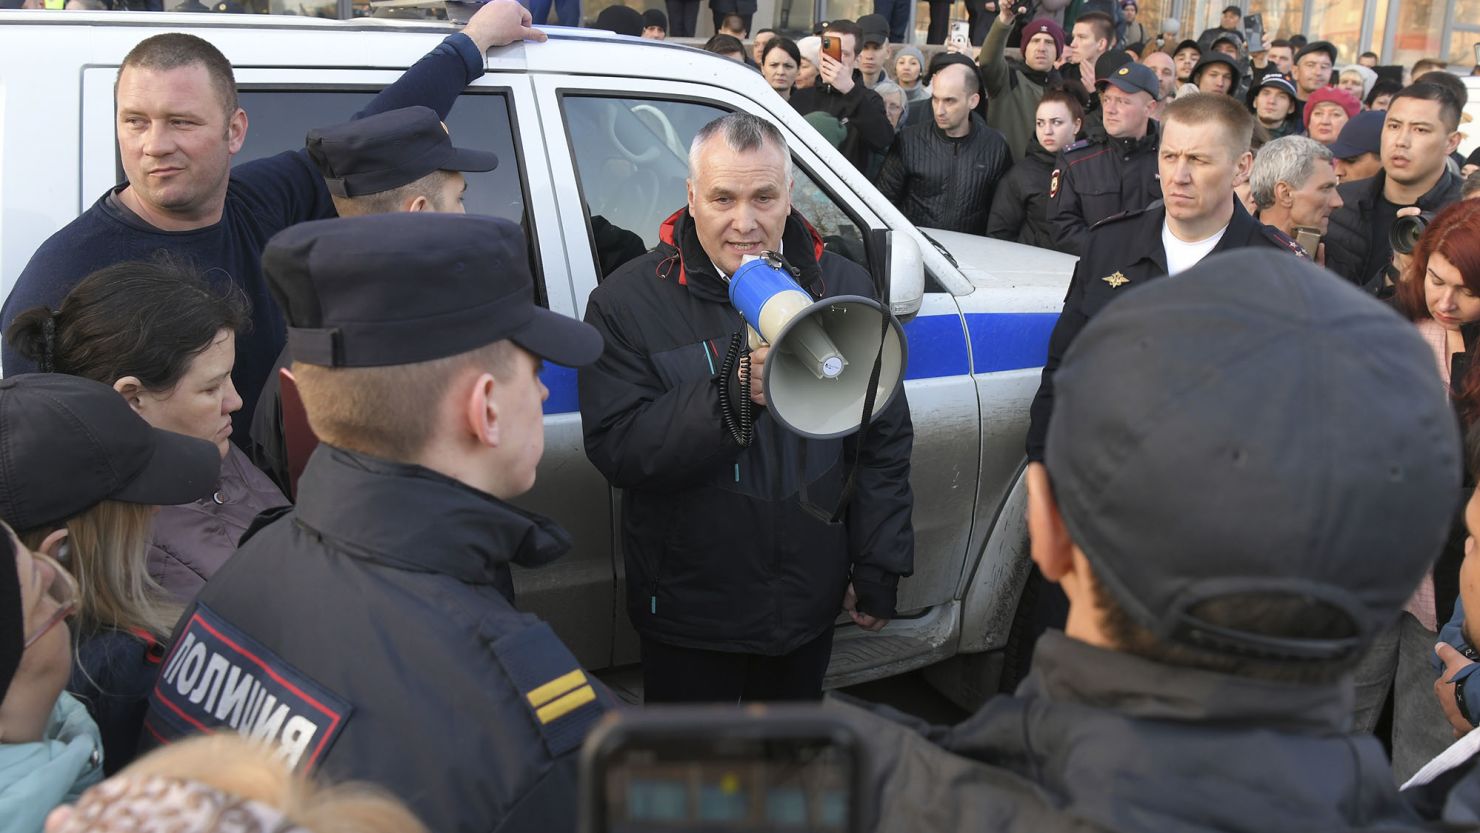 Orsk Mayor Vasily Kozupitsa, centre, speaks to the residents during a protest over local authorities' perceived inaction after a dam broke in the city.